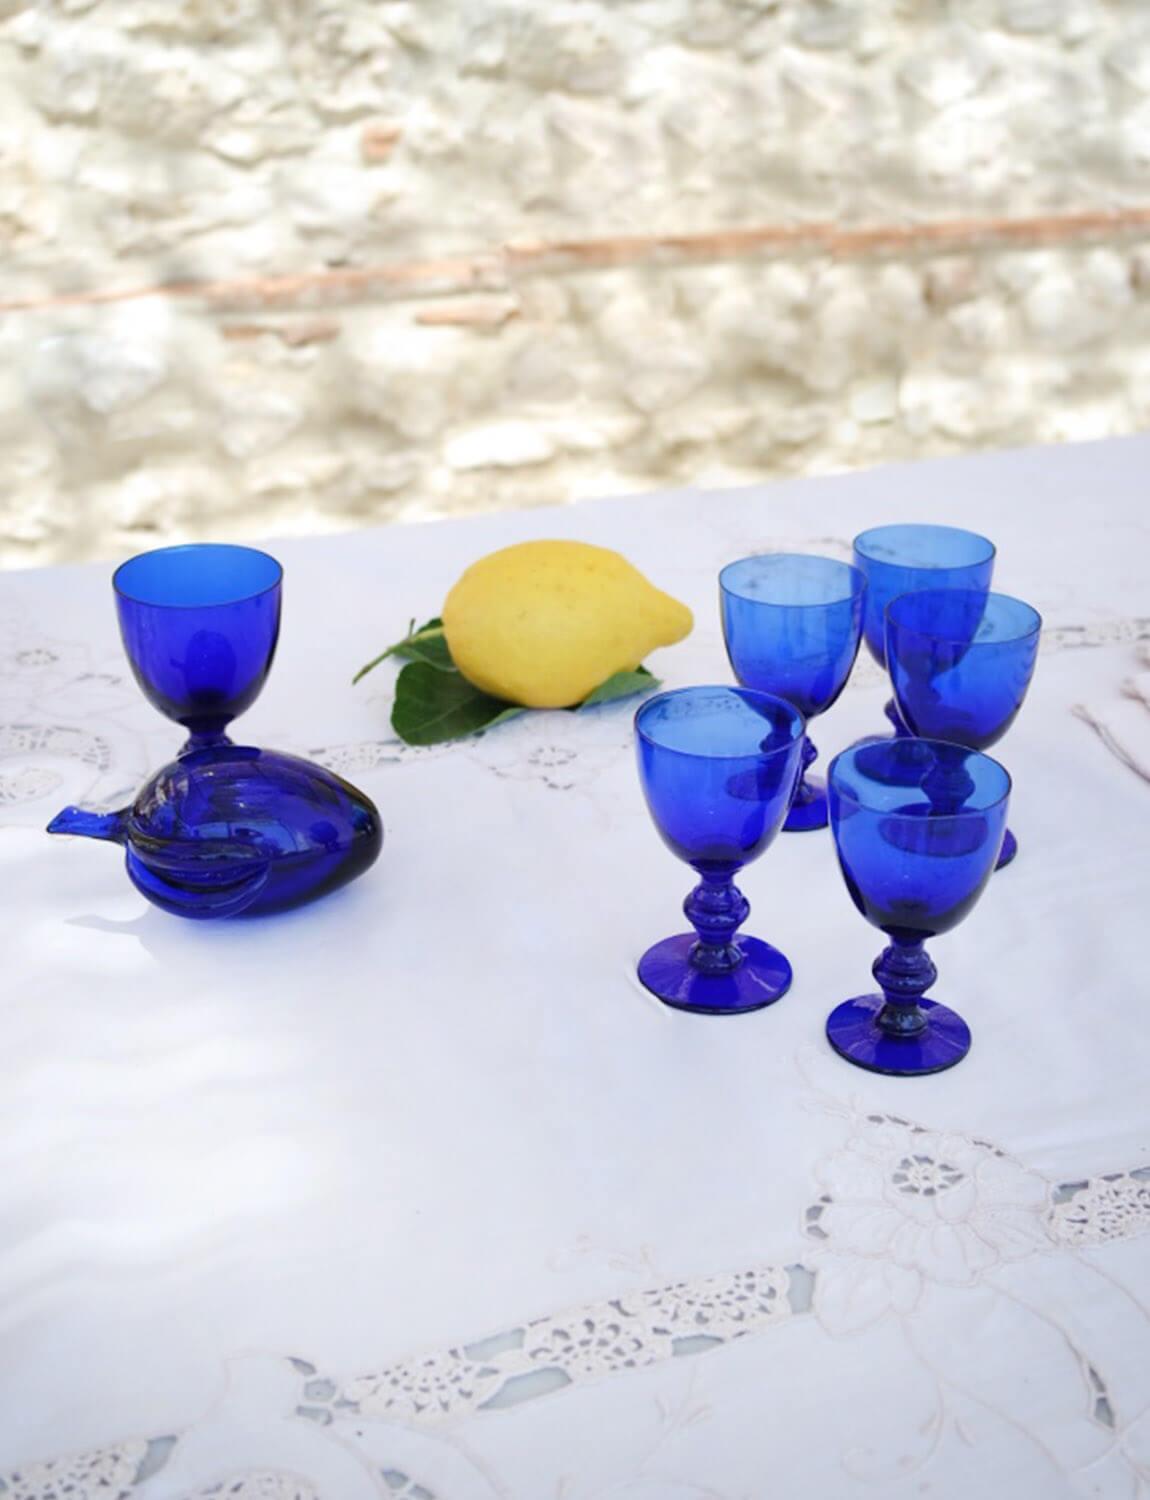 Set of five dark blue Italian aperitivi glasses. The glasses are petit in size and a wonderful deep blue colour. Made in the 1960s, they are in good condition.

(Please note, large blue goblet and plumb in one photo are not included.